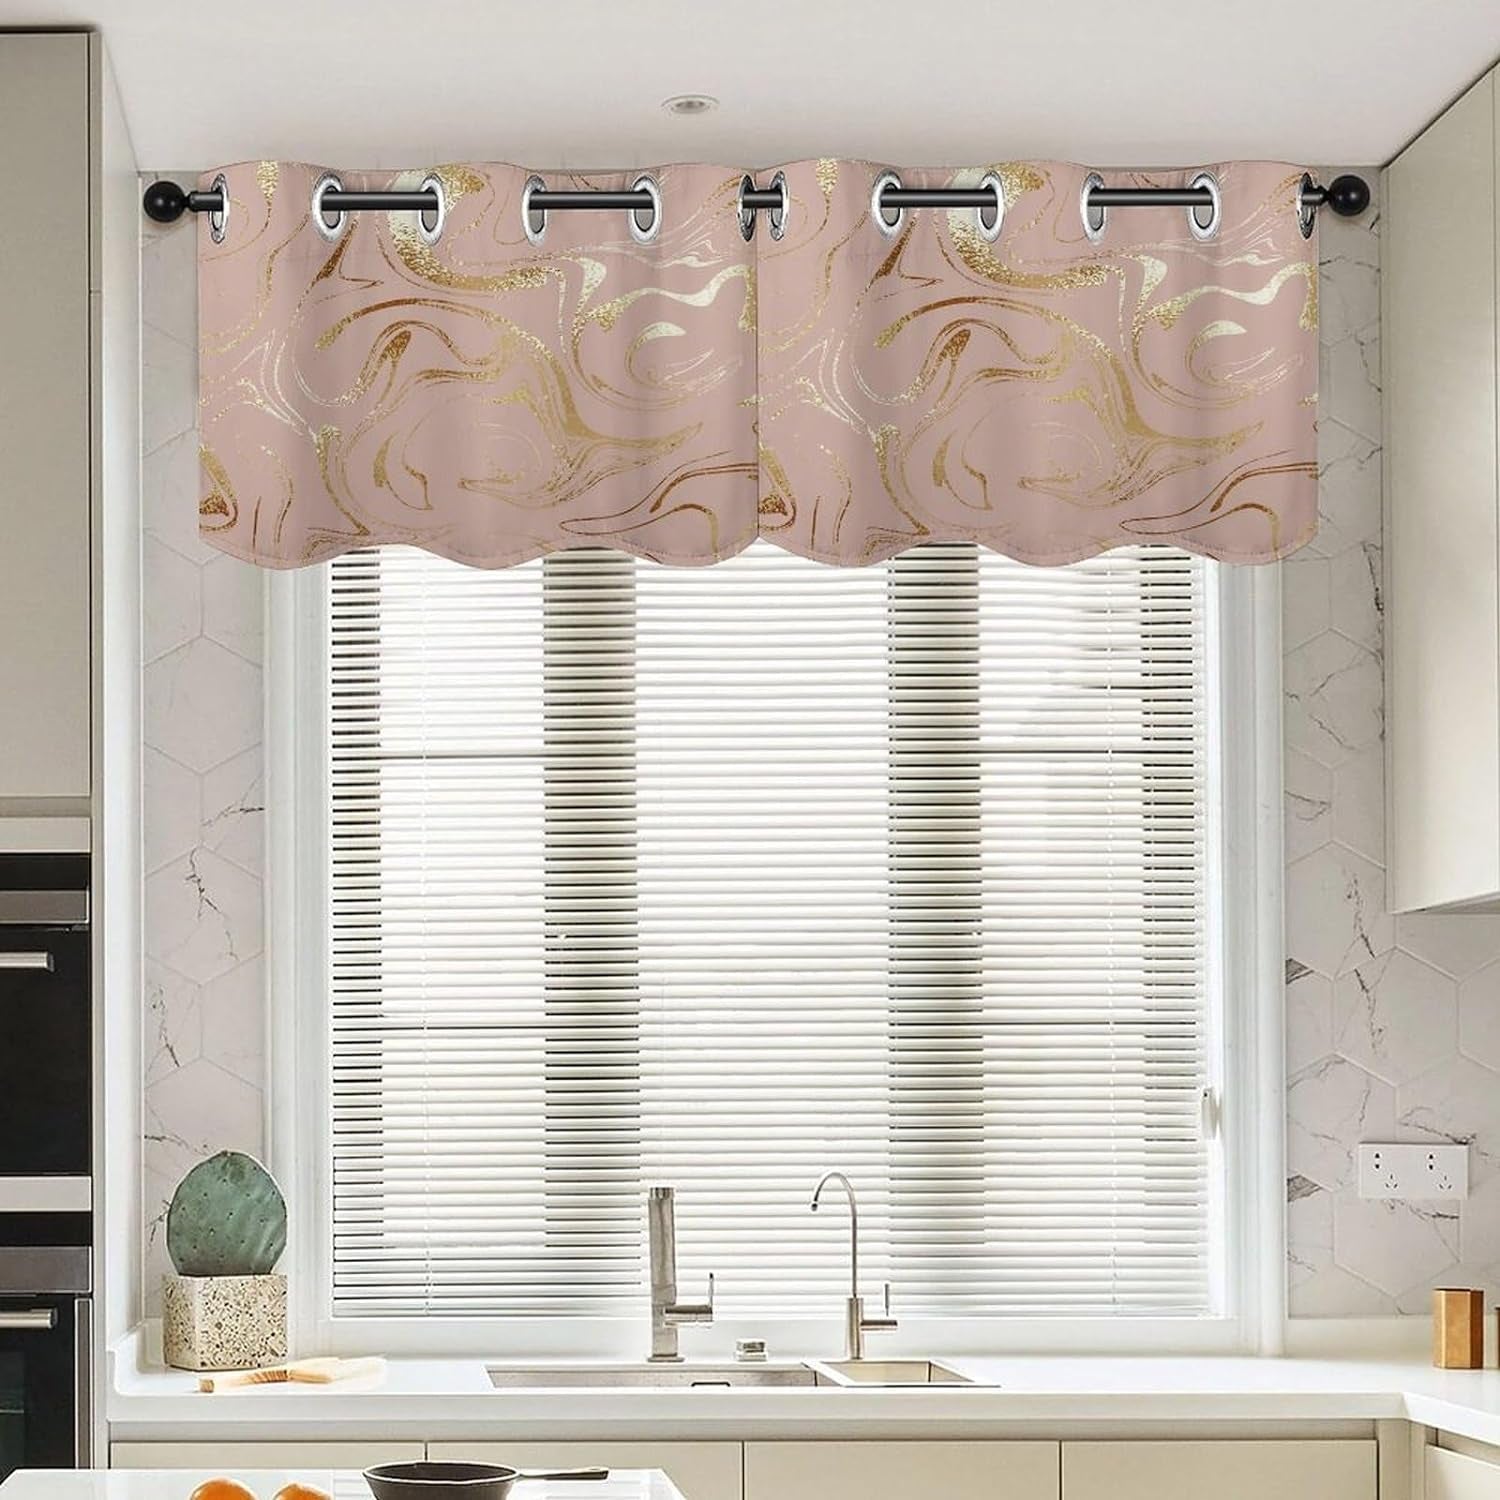 Pink Unicorn Valances for Bedroom Windows 2 Pack Fairy Tale Magic Garden Small Window Valance for Kitchen Bathroom Windows Decor with Grommet 52X18 Inch